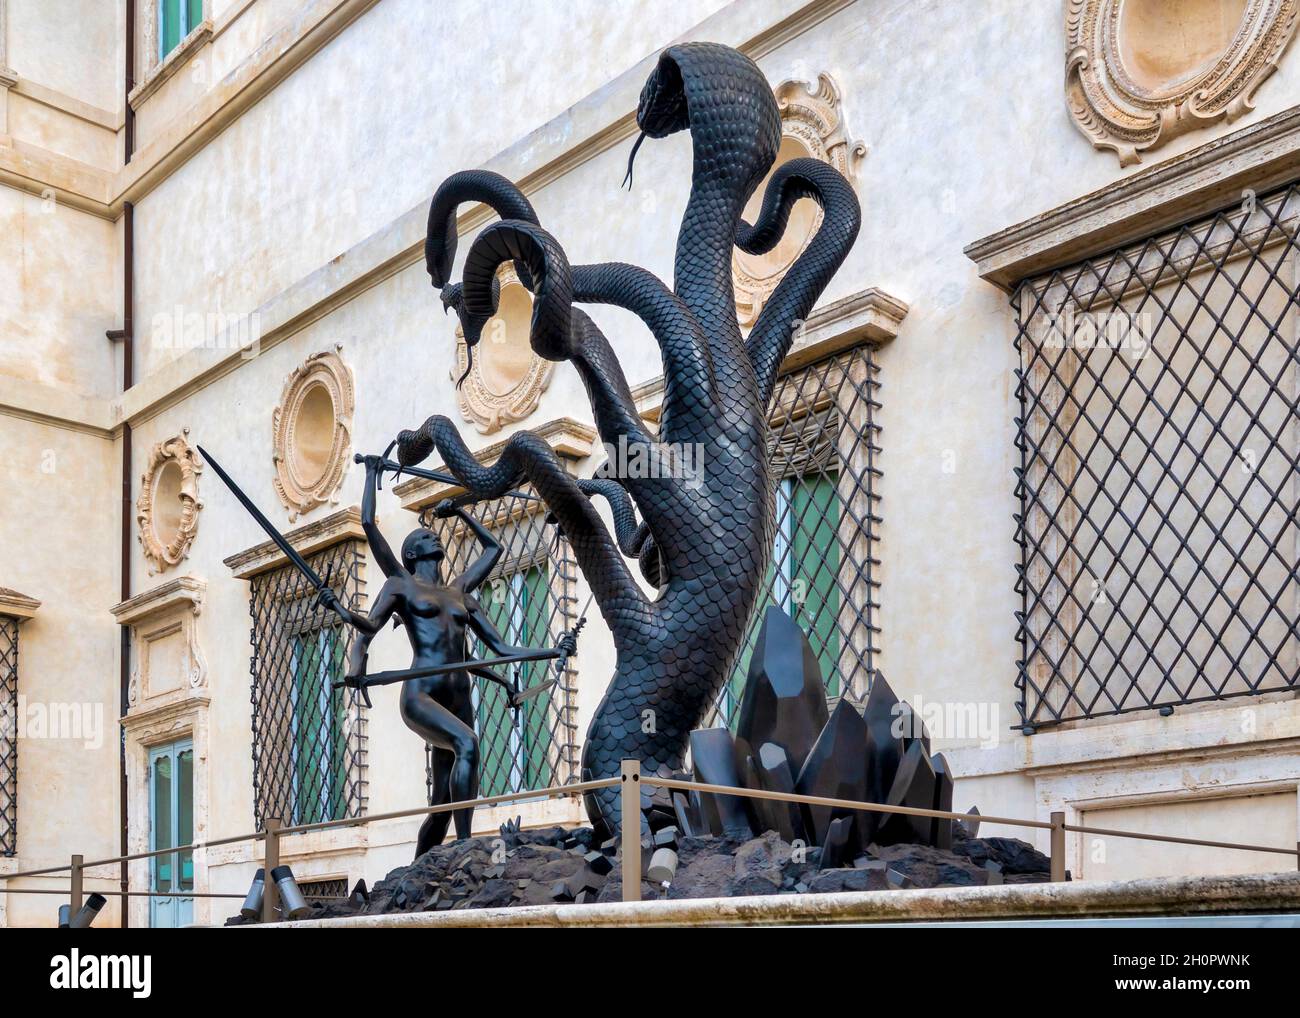 Hydra and Kali by Damien Hirst is displayed outdoors in the Giardino Segreto of the Uccelliera in the Galleria Borghese, Rome, Italy Stock Photo